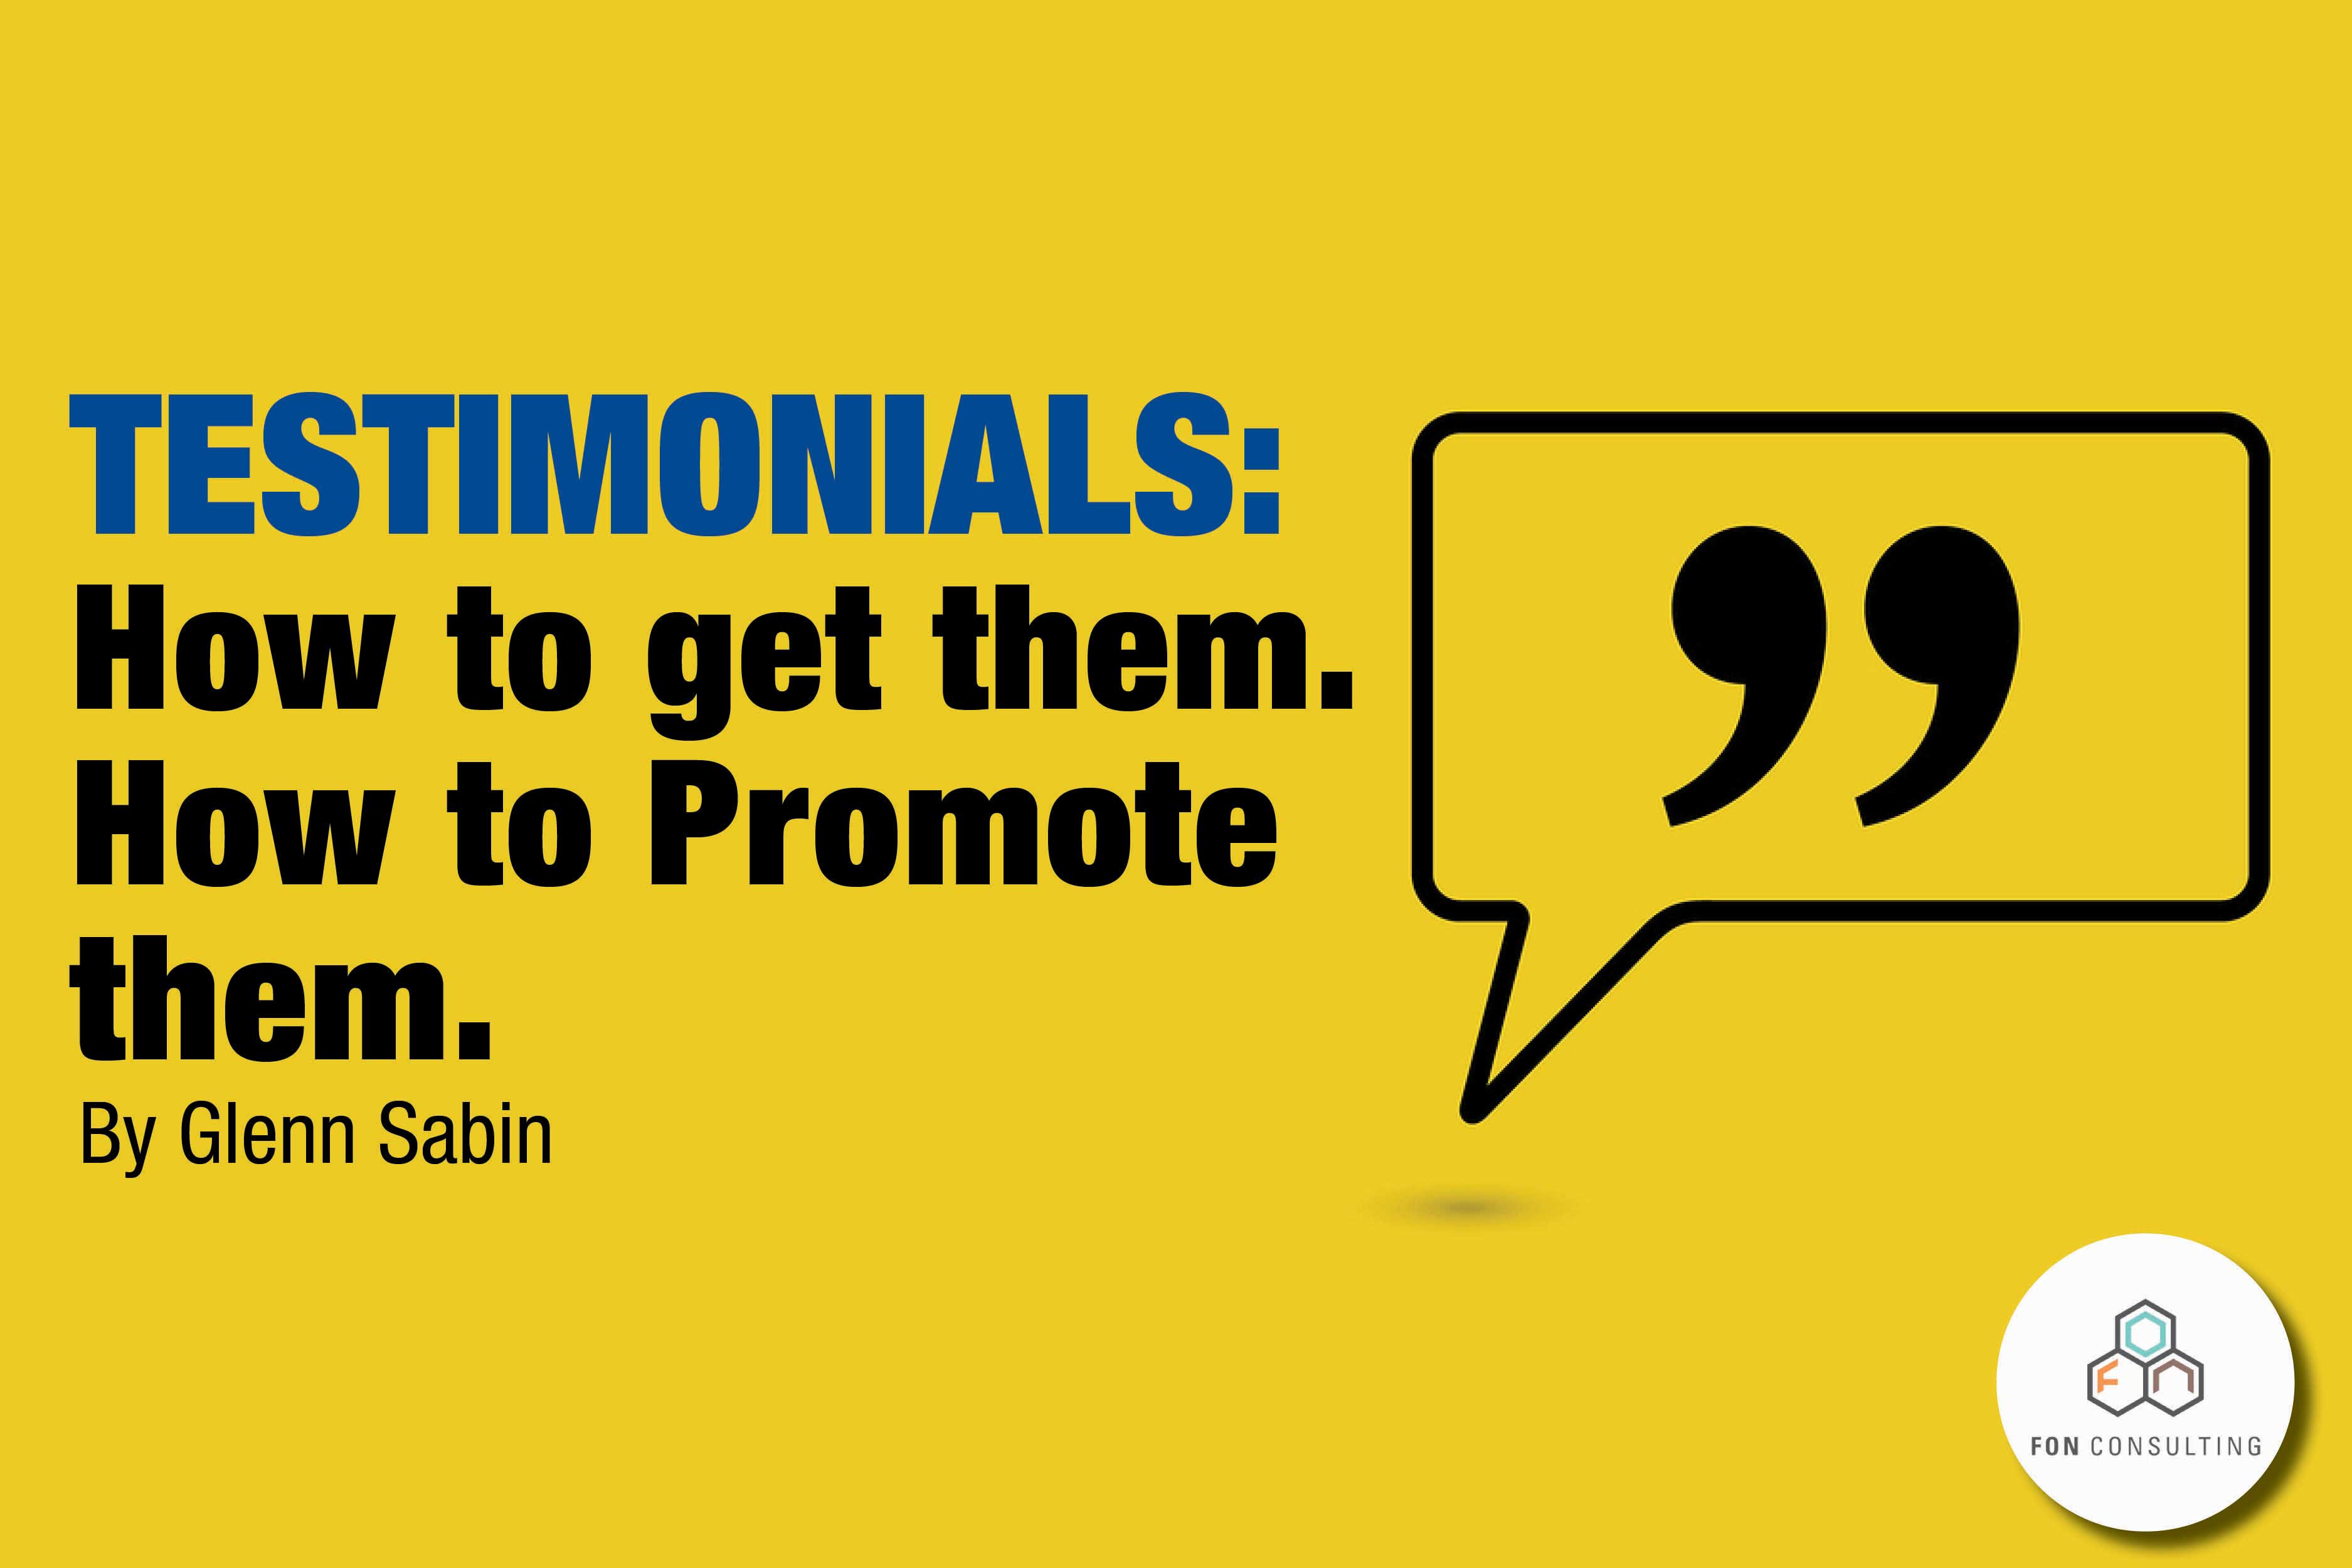 Testimonials: How to Get them. How to Promote Them